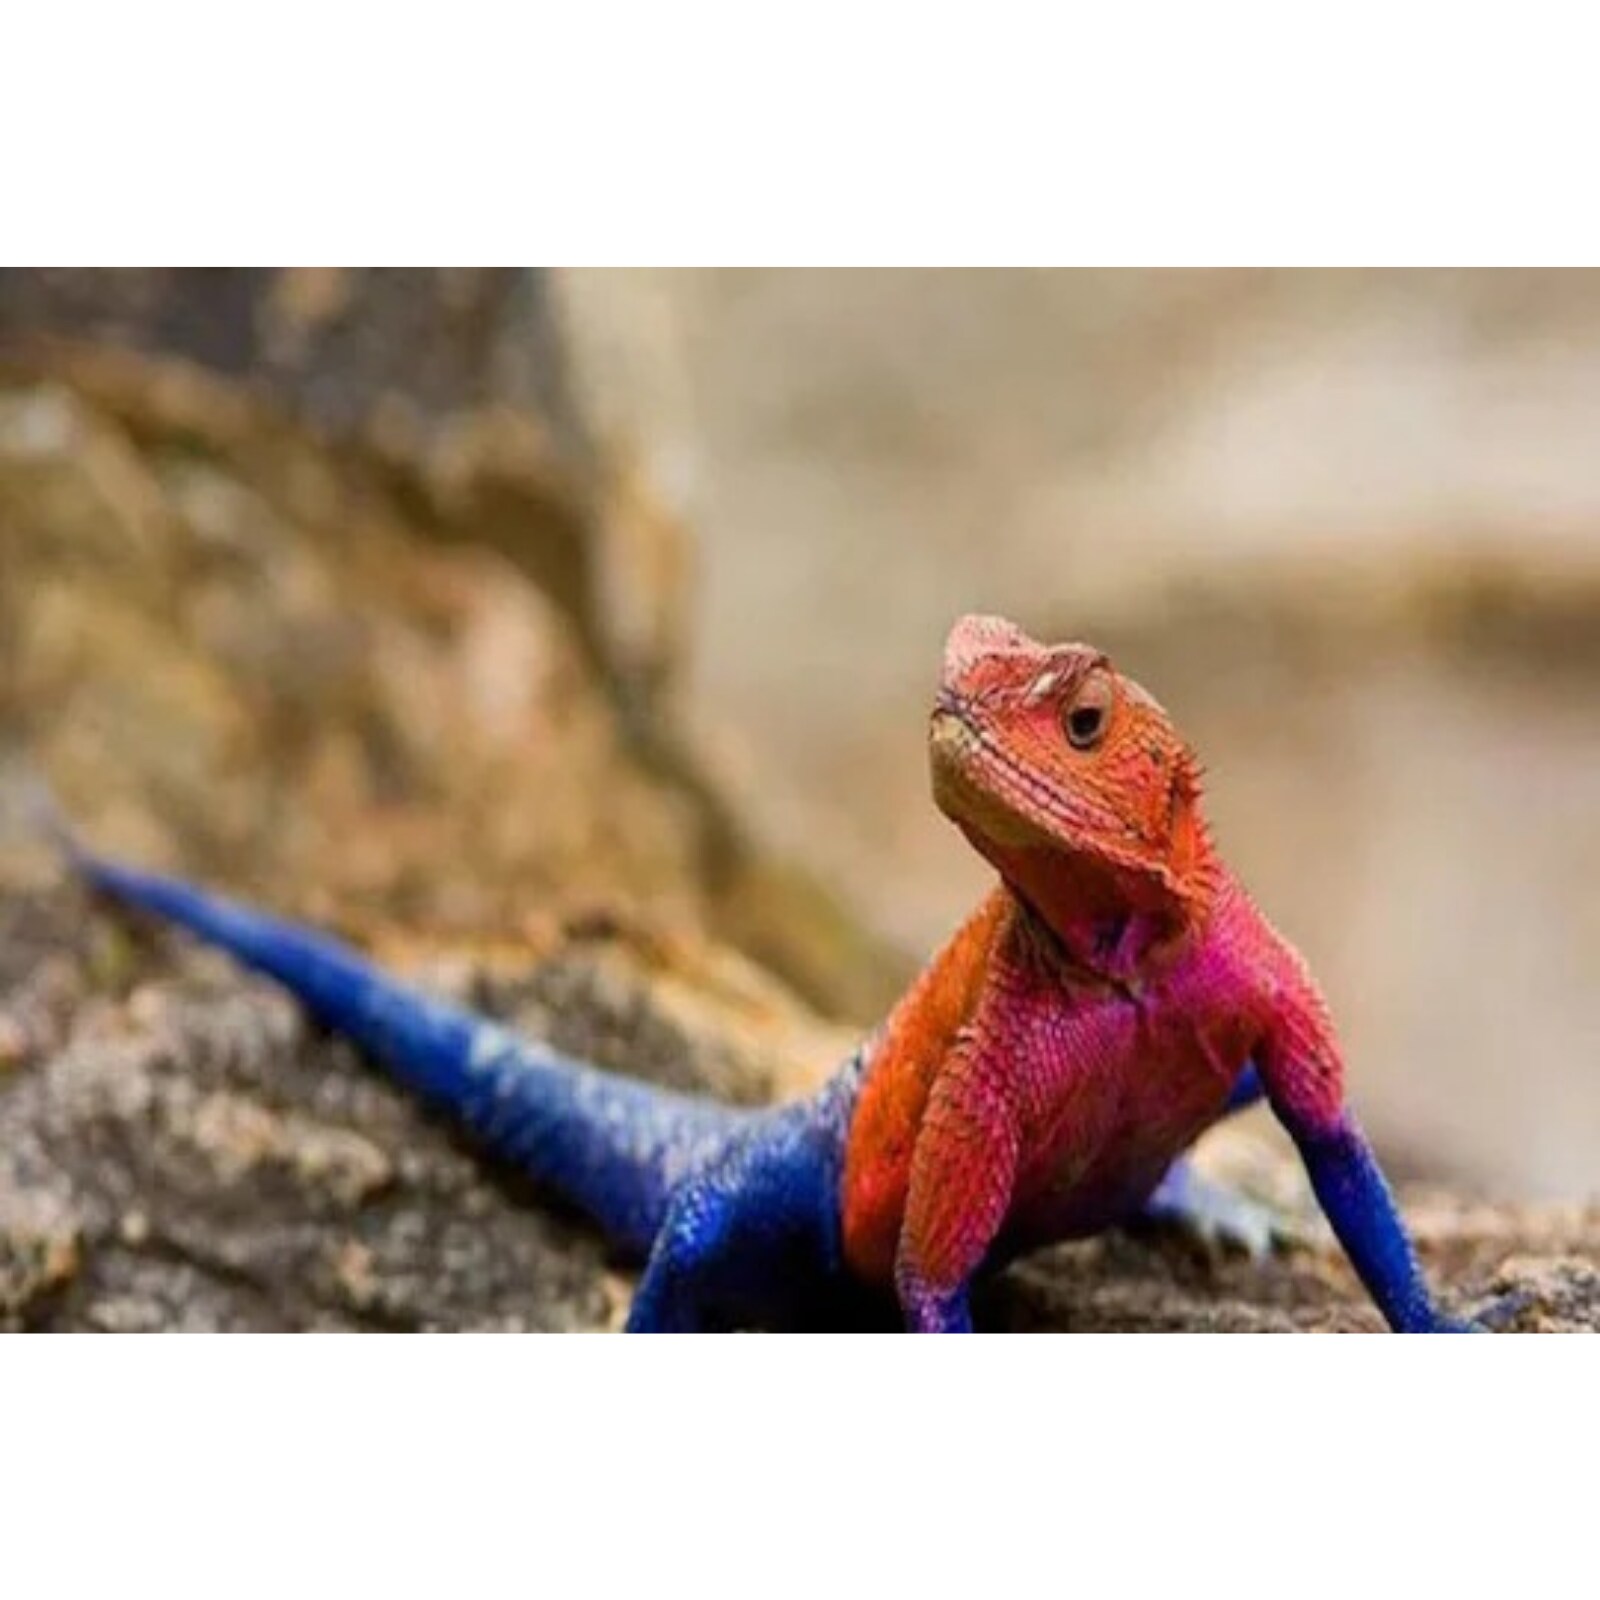 Picture of Chameleon in the Form of Spiderman Goes Viral, People Can't Stop  Laughing